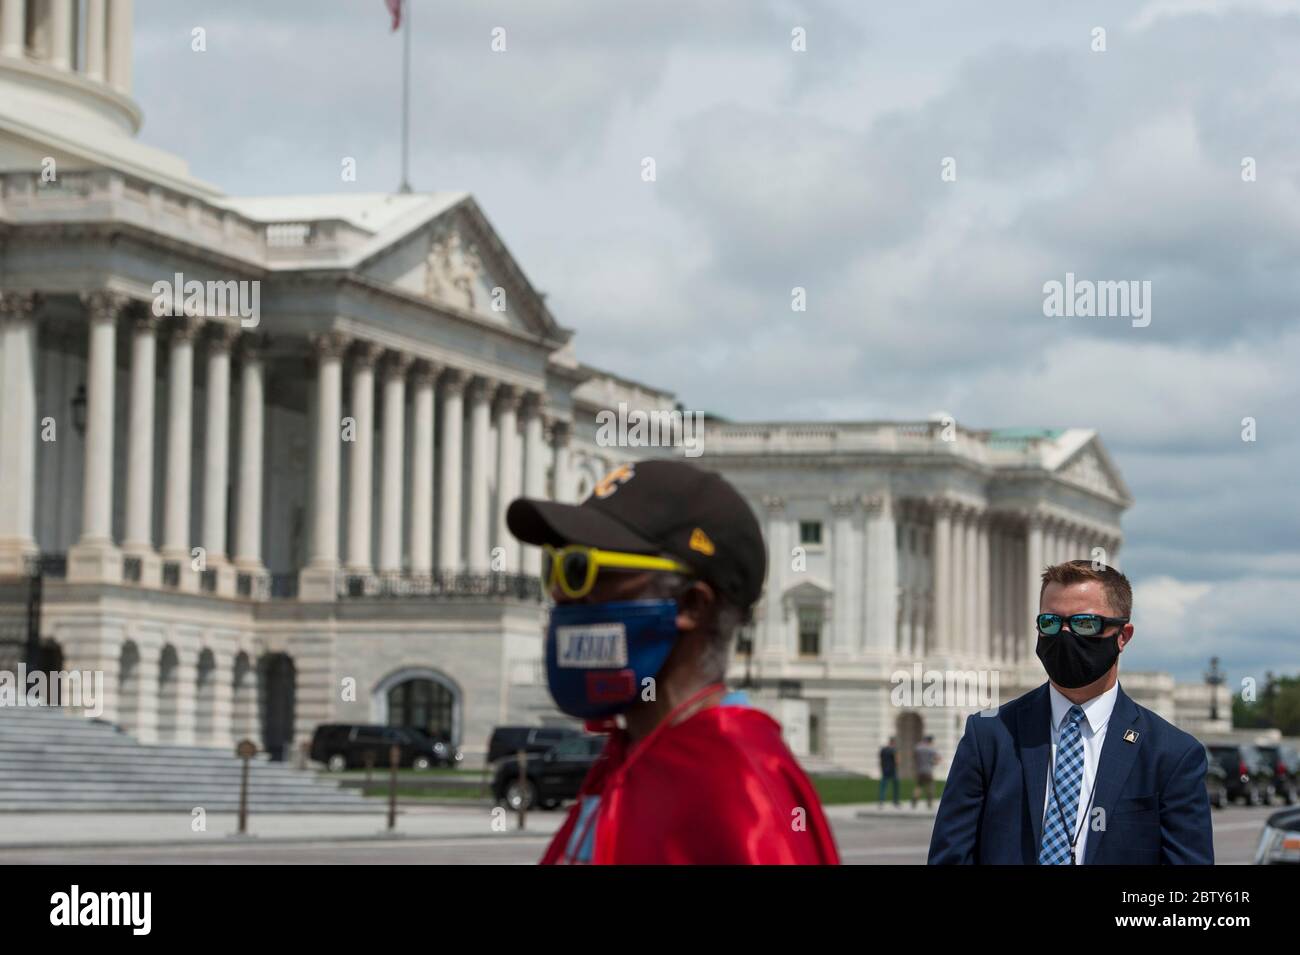 Michael Wheeler, of Kansas City, MO, (left) wears his 'Super Jesus' outfit and face mask while a US Capitol Security detail stands at right as House Minority Leader Rep. Kevin McCarthy (R-Calif.) holds a media availability with House Minority Whip Rep. Steve Scalise (R-LA), House GOP Conference Chairwoman Liz Cheney (R-WY) and others, to announce that Republican leaders have filed a lawsuit against House Speaker Nancy Pelosi and congressional officials in an effort to block the House of Representatives from using a proxy voting system to allow for remote voting during the coronavirus pandemic, Stock Photo